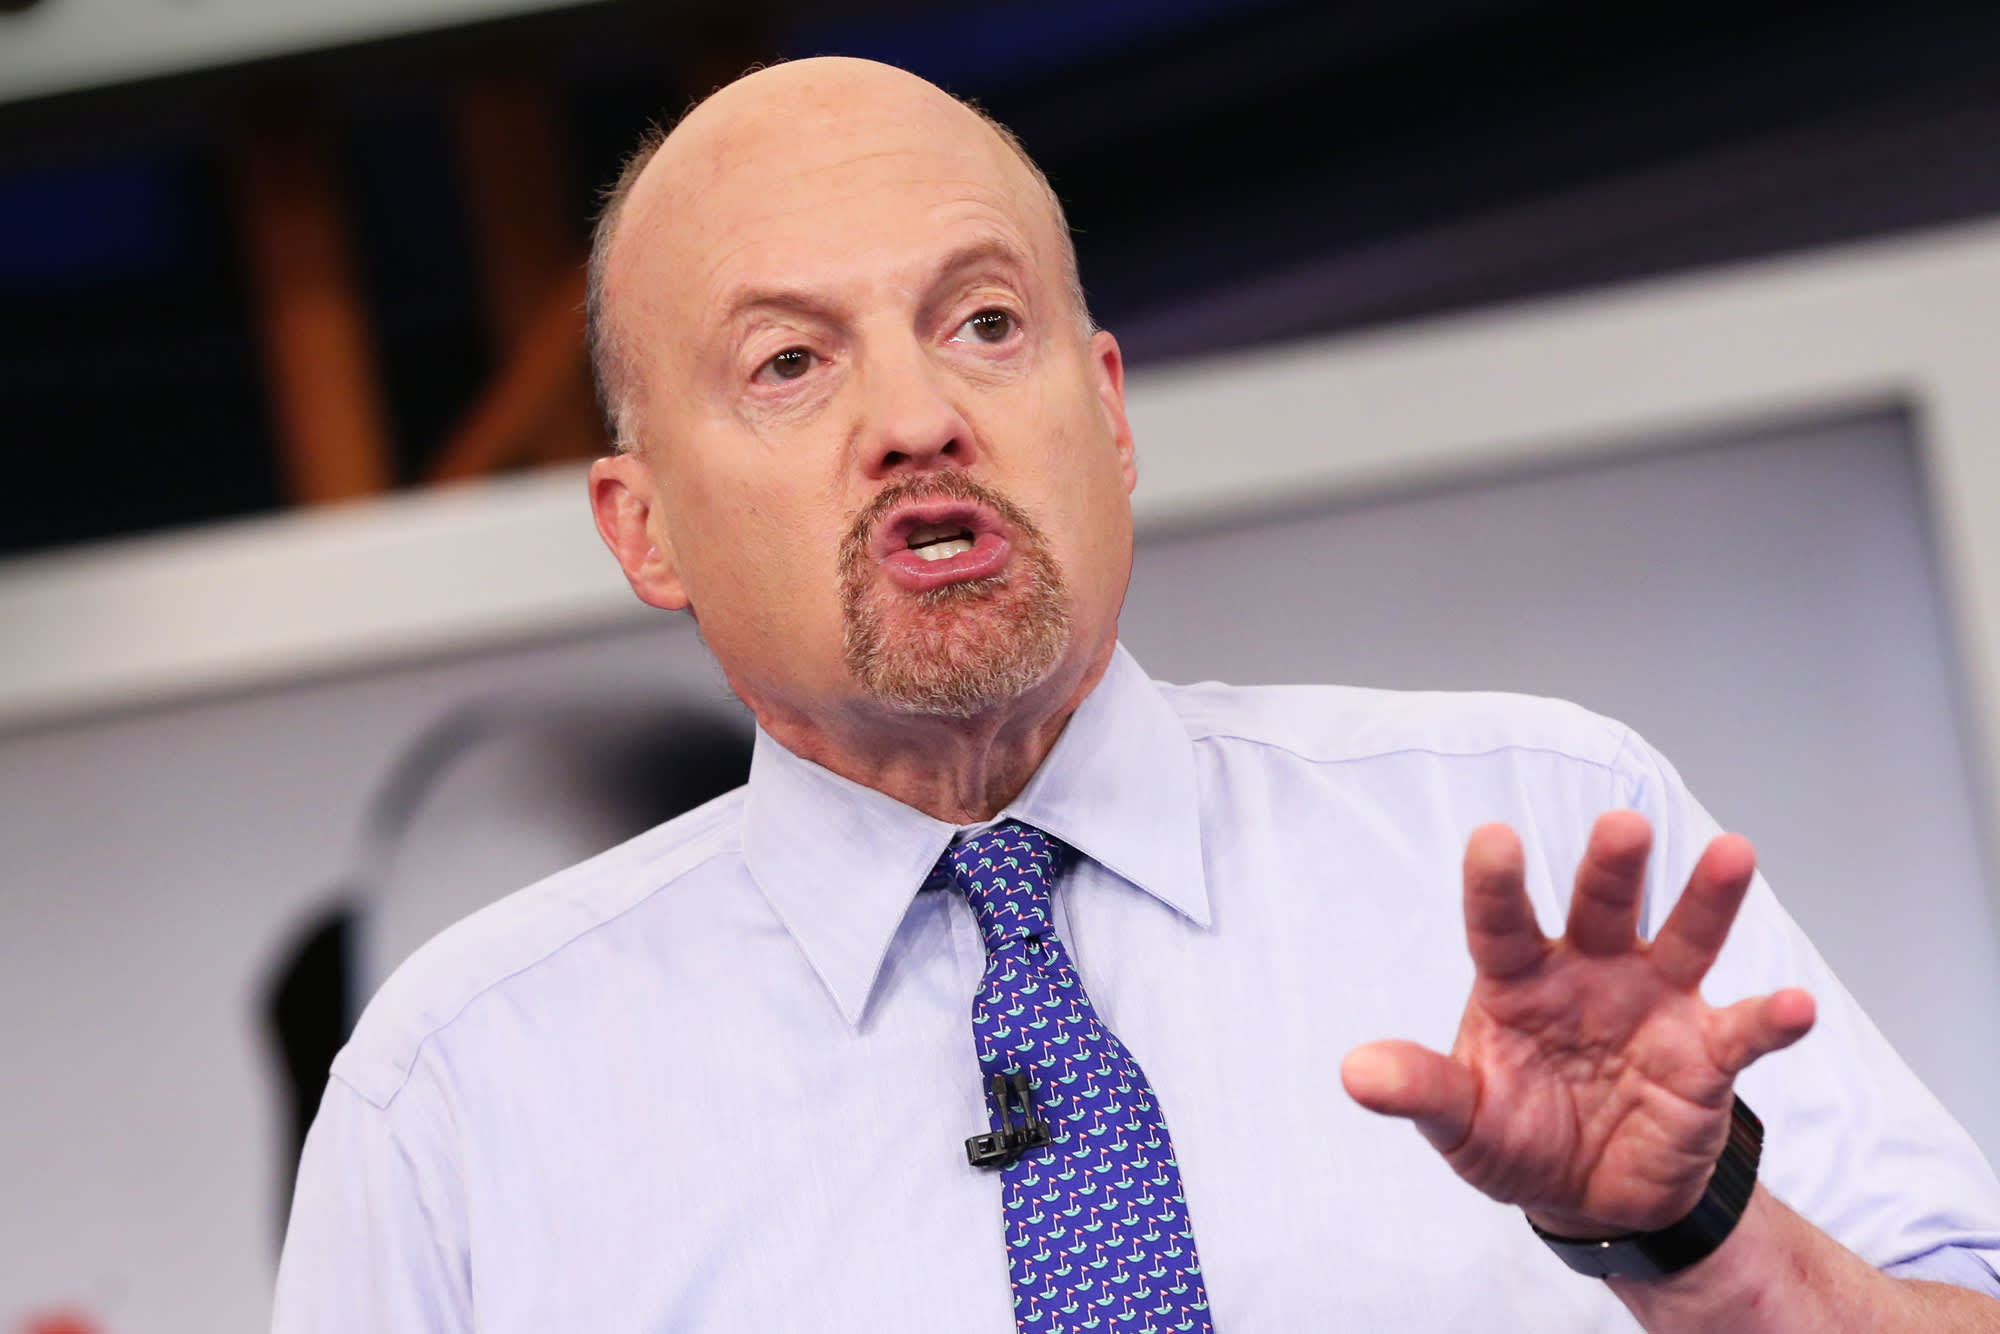 Jim Cramer says the market won’t go down until he sees a moment of “crescendo”